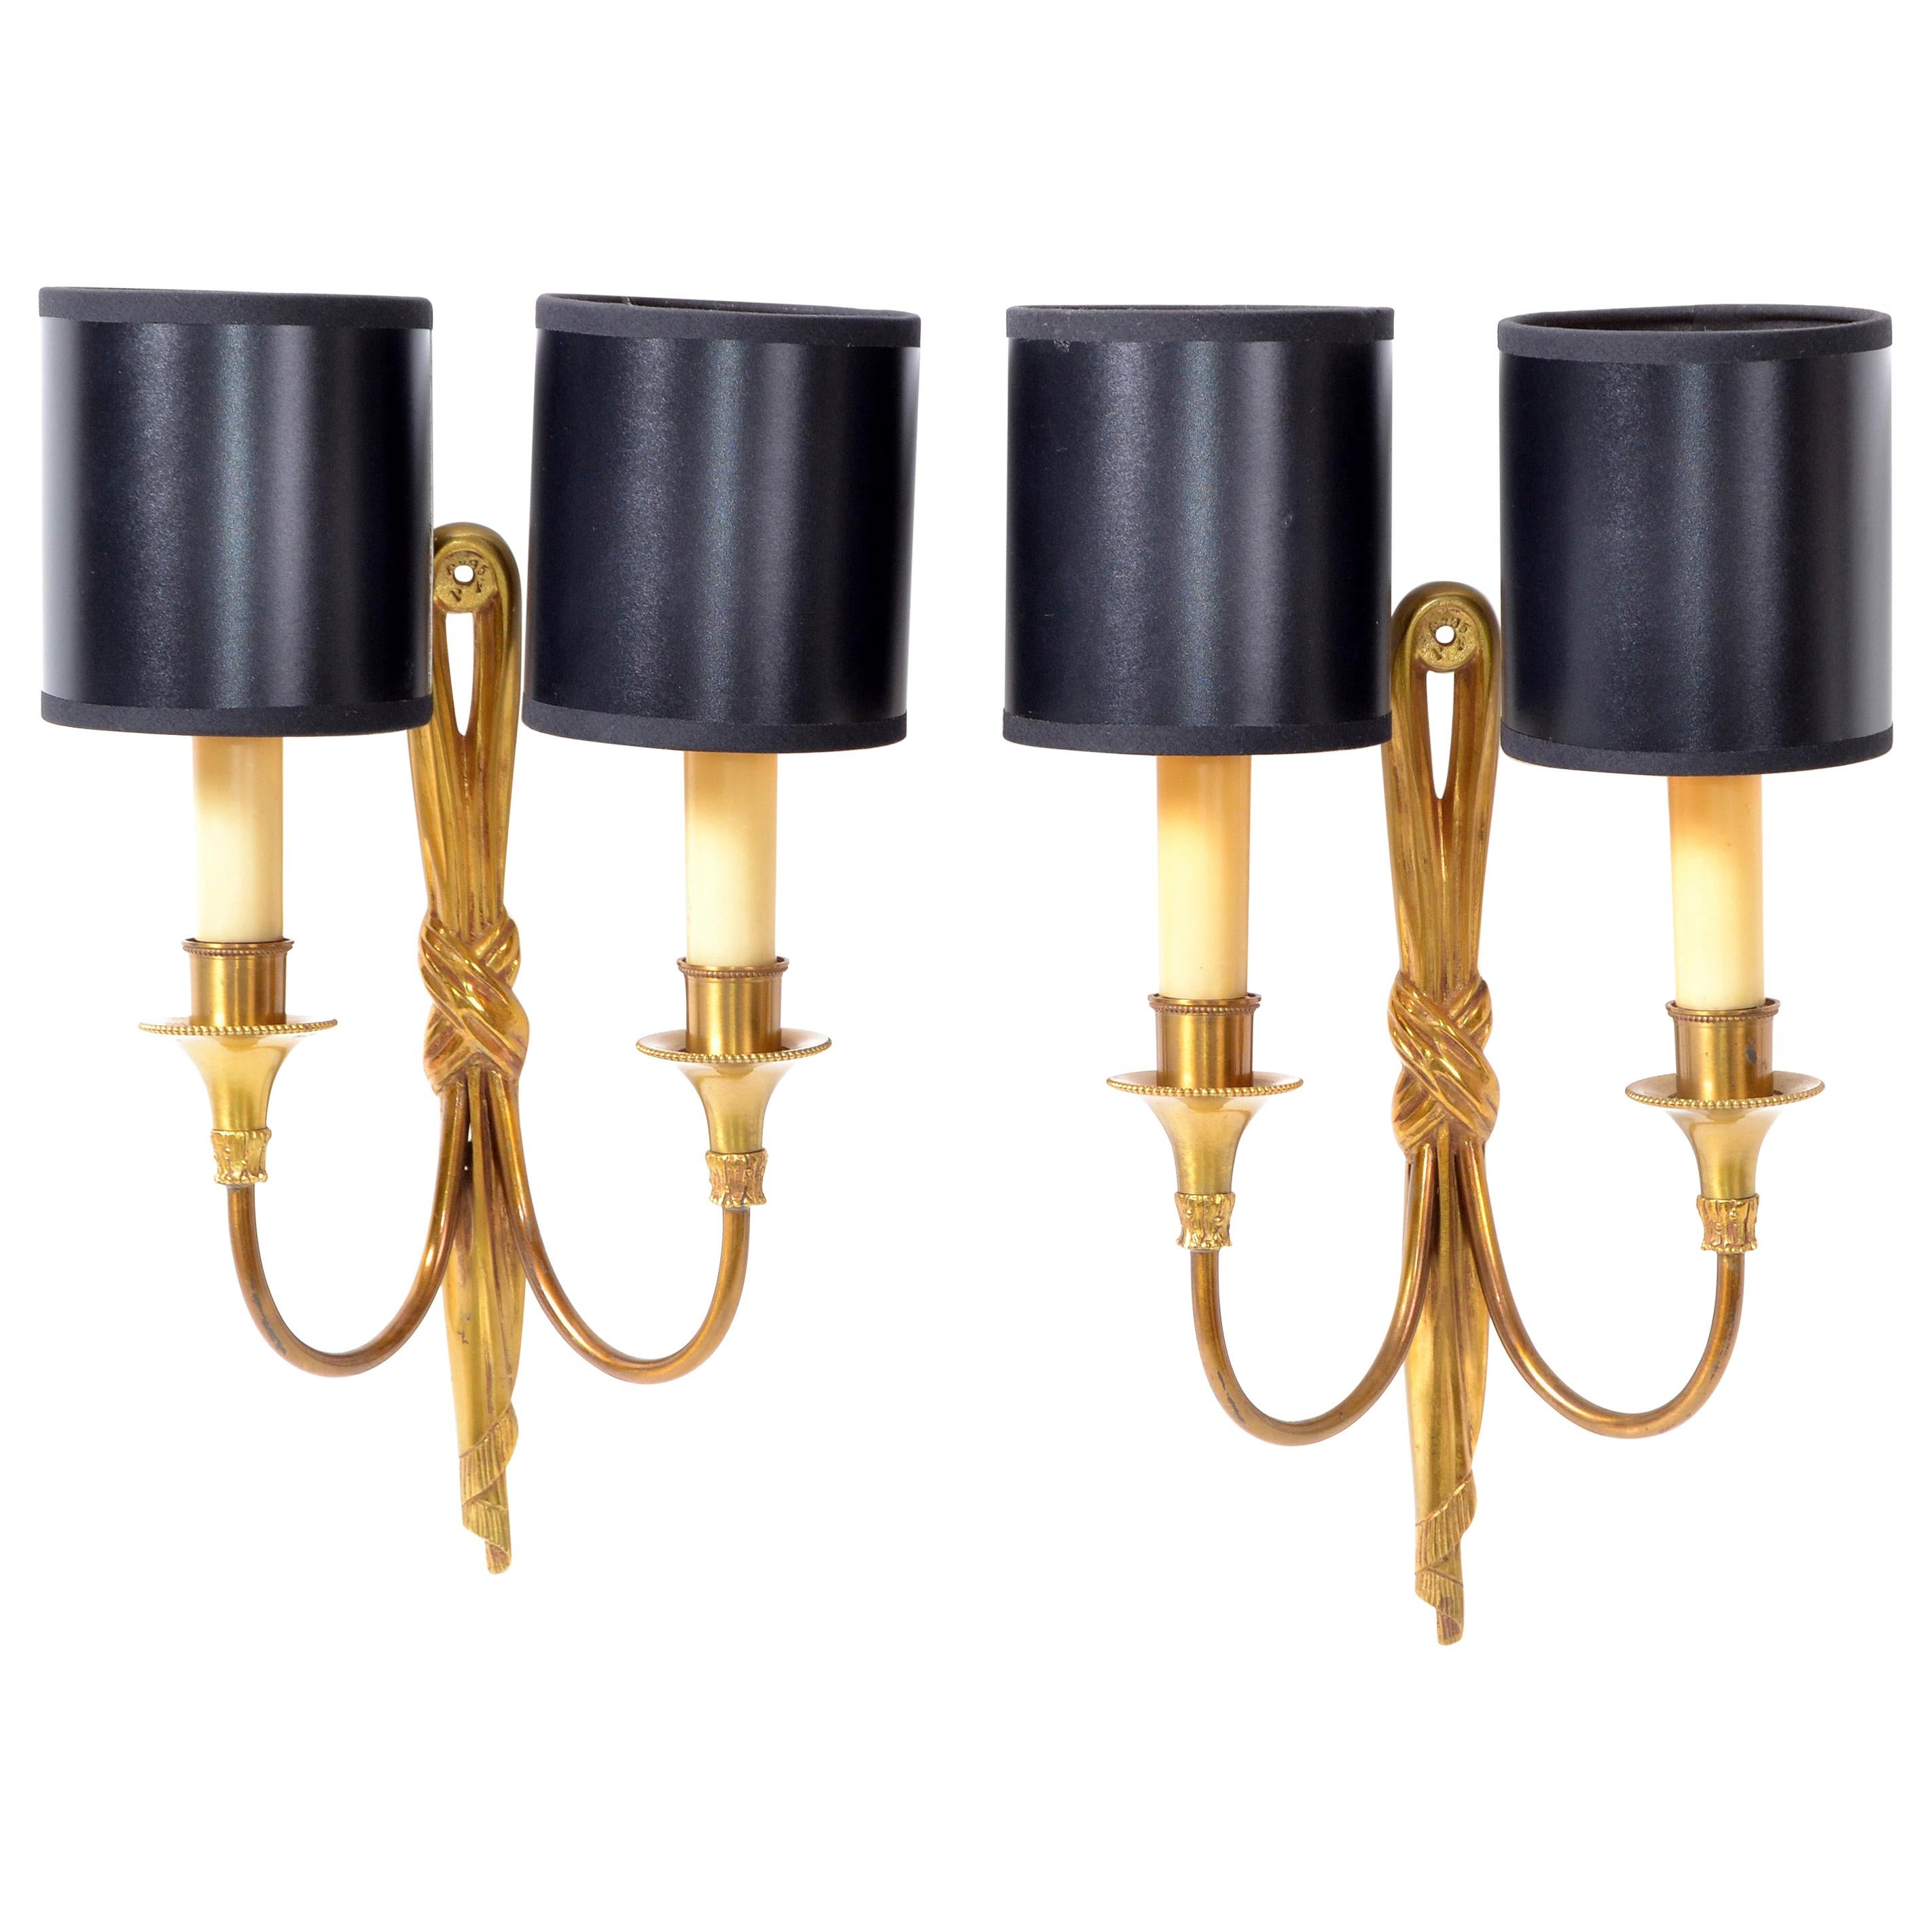 Maison Charles French Bronze Drapes Sconces France 1950s, 2 Pair Available